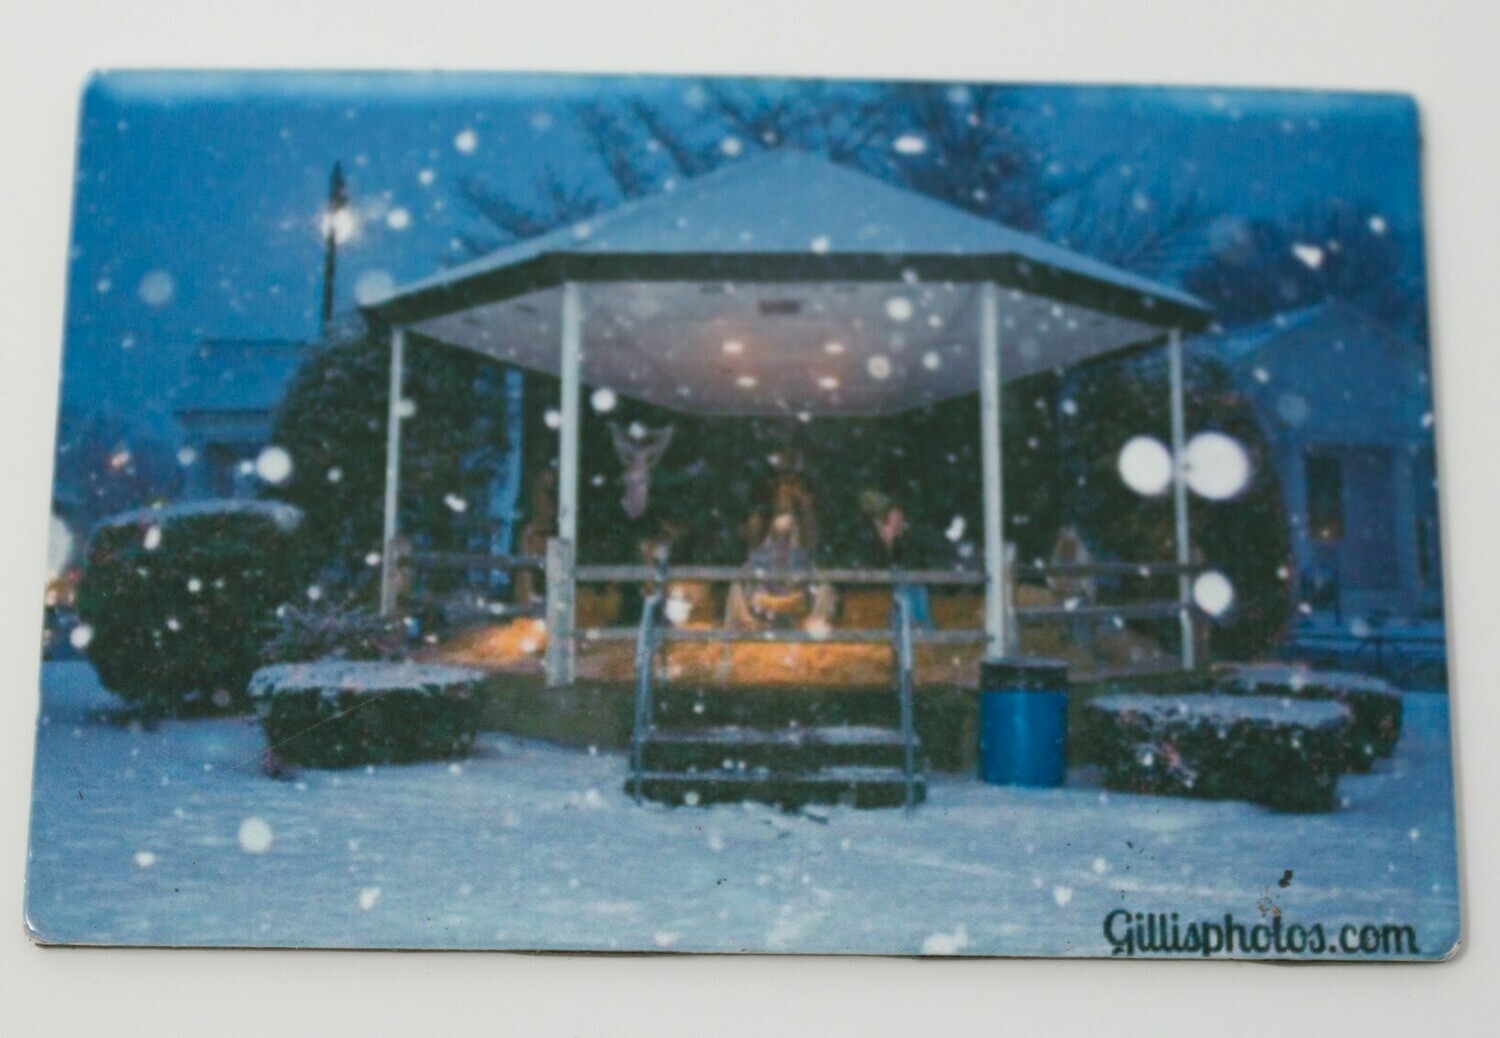 2&quot;x 3&quot; Photo Magnet With Image of The Foxboro Nativity Scene in the Snow​